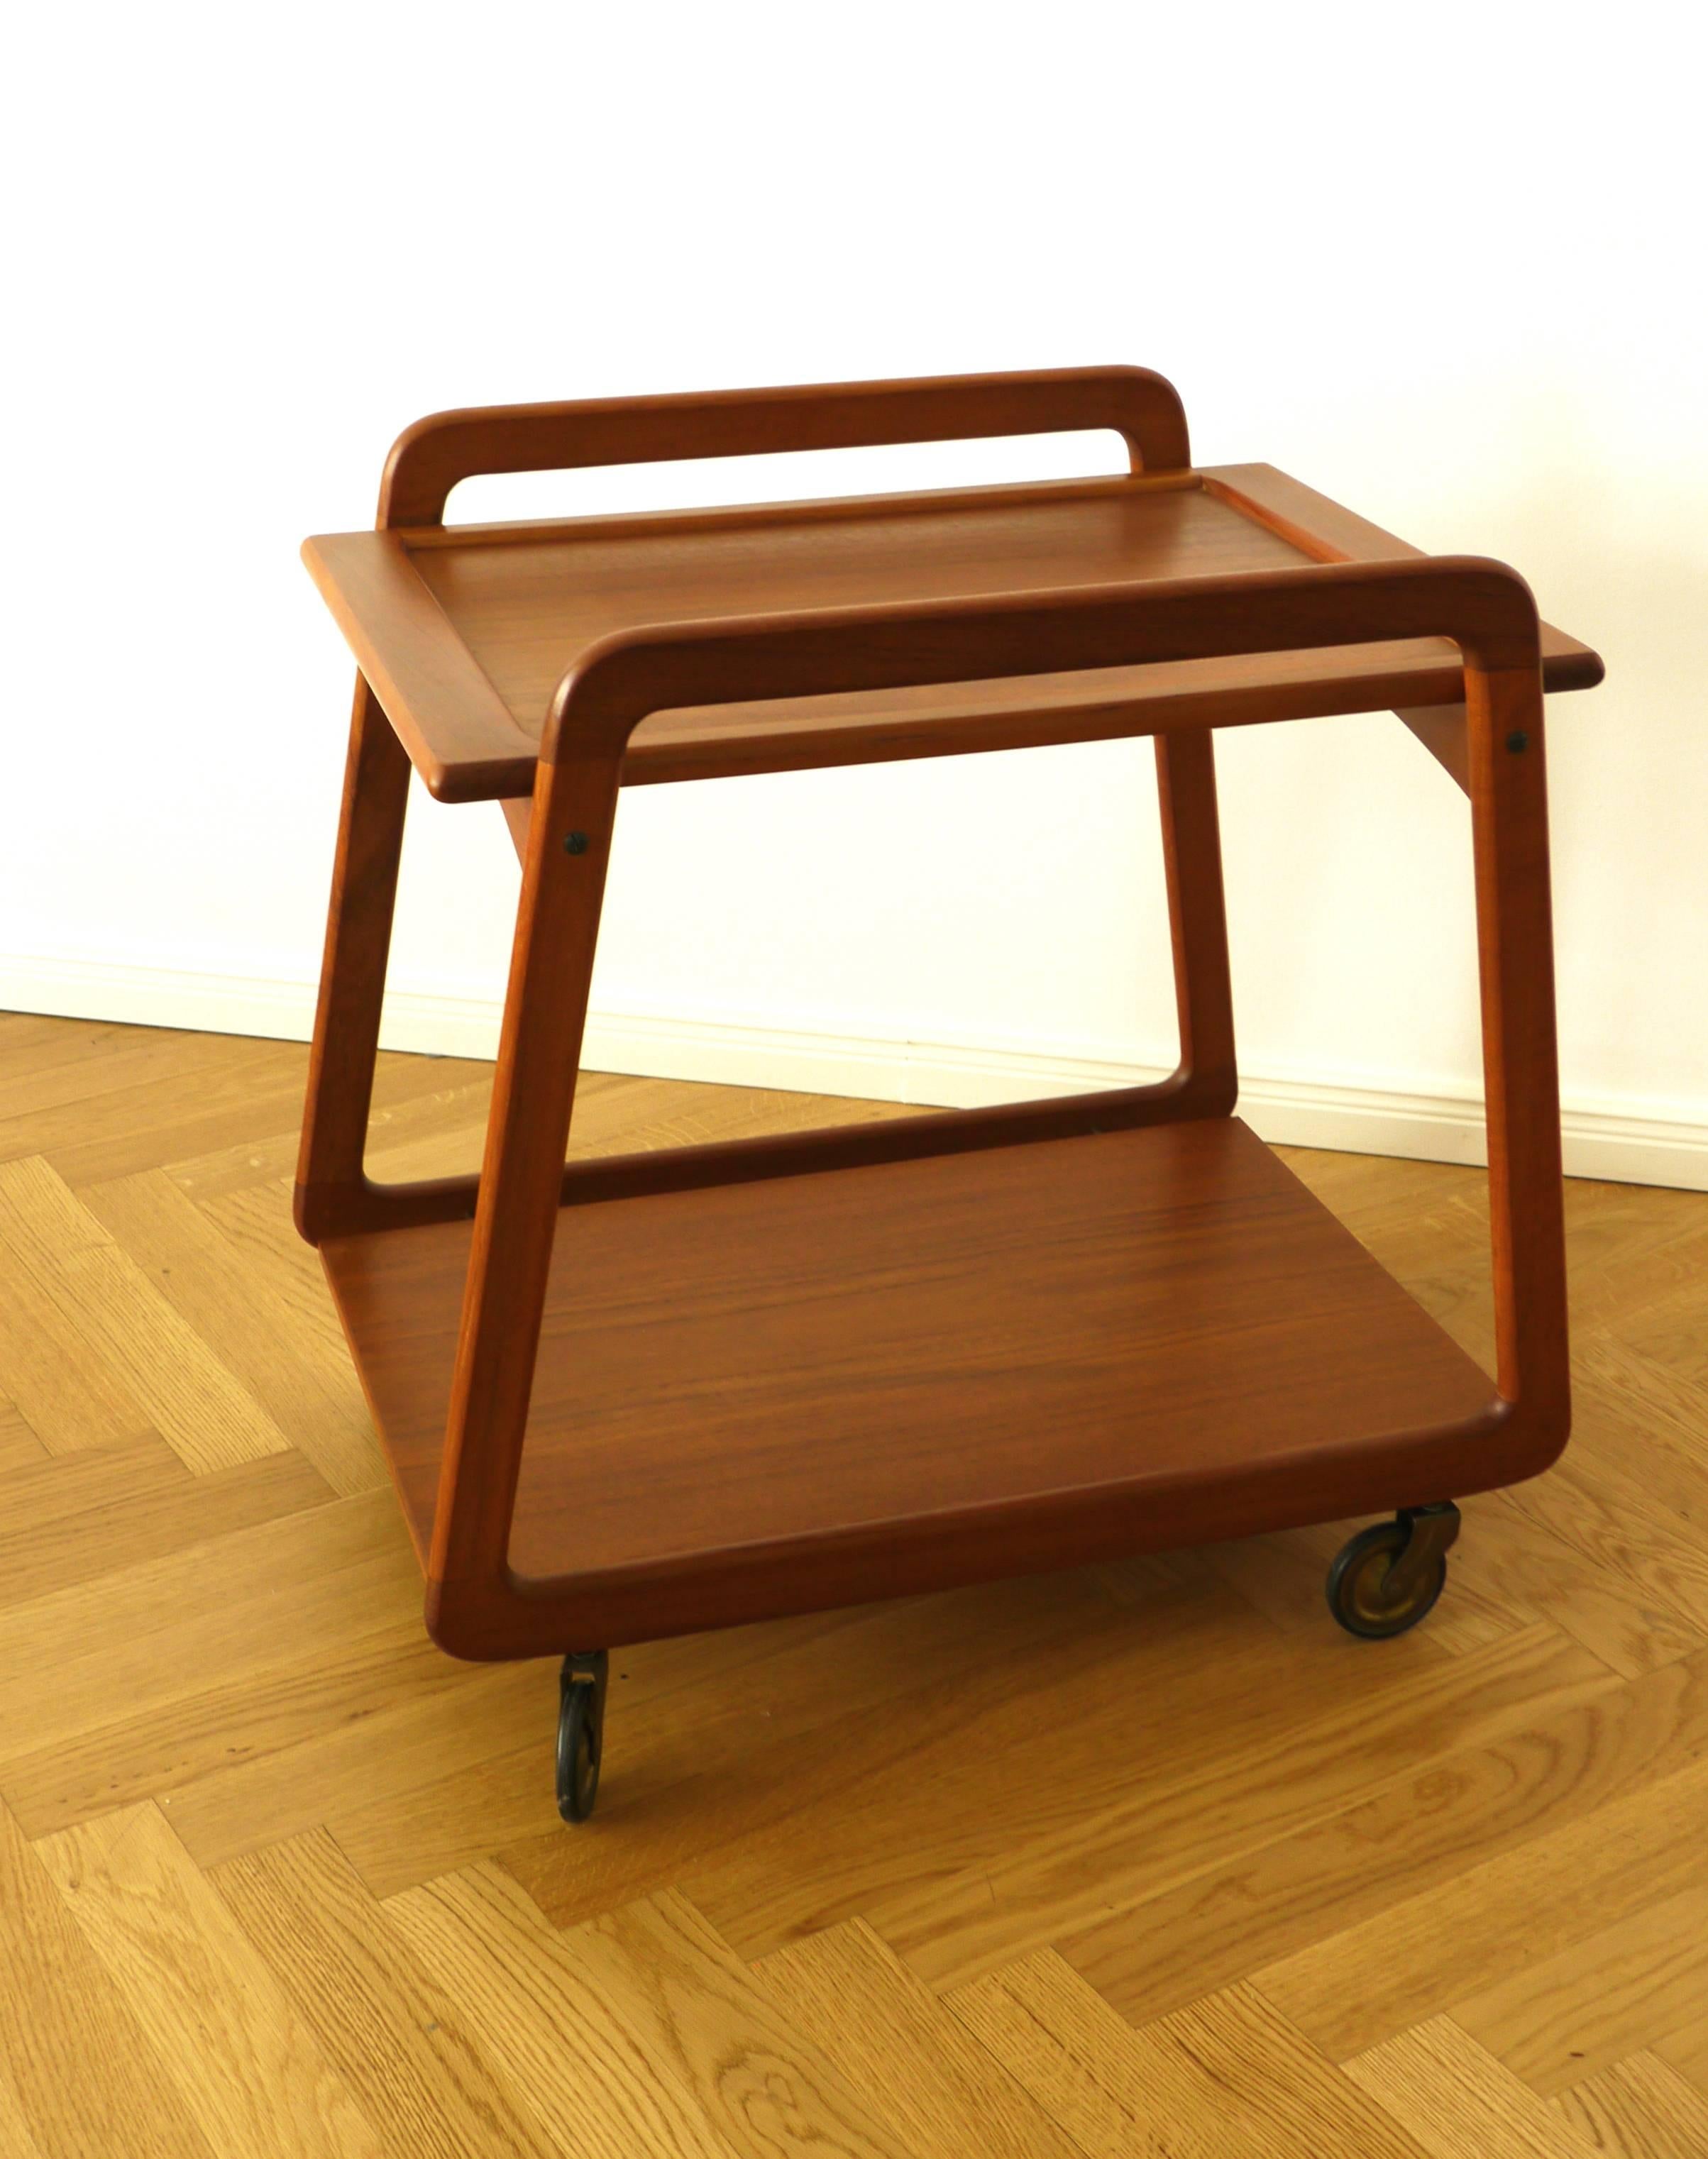 Scandinavian Modern Danish Mid-Century Drinks Trolley with Removable Tray by Sika Mobler, 1960s For Sale